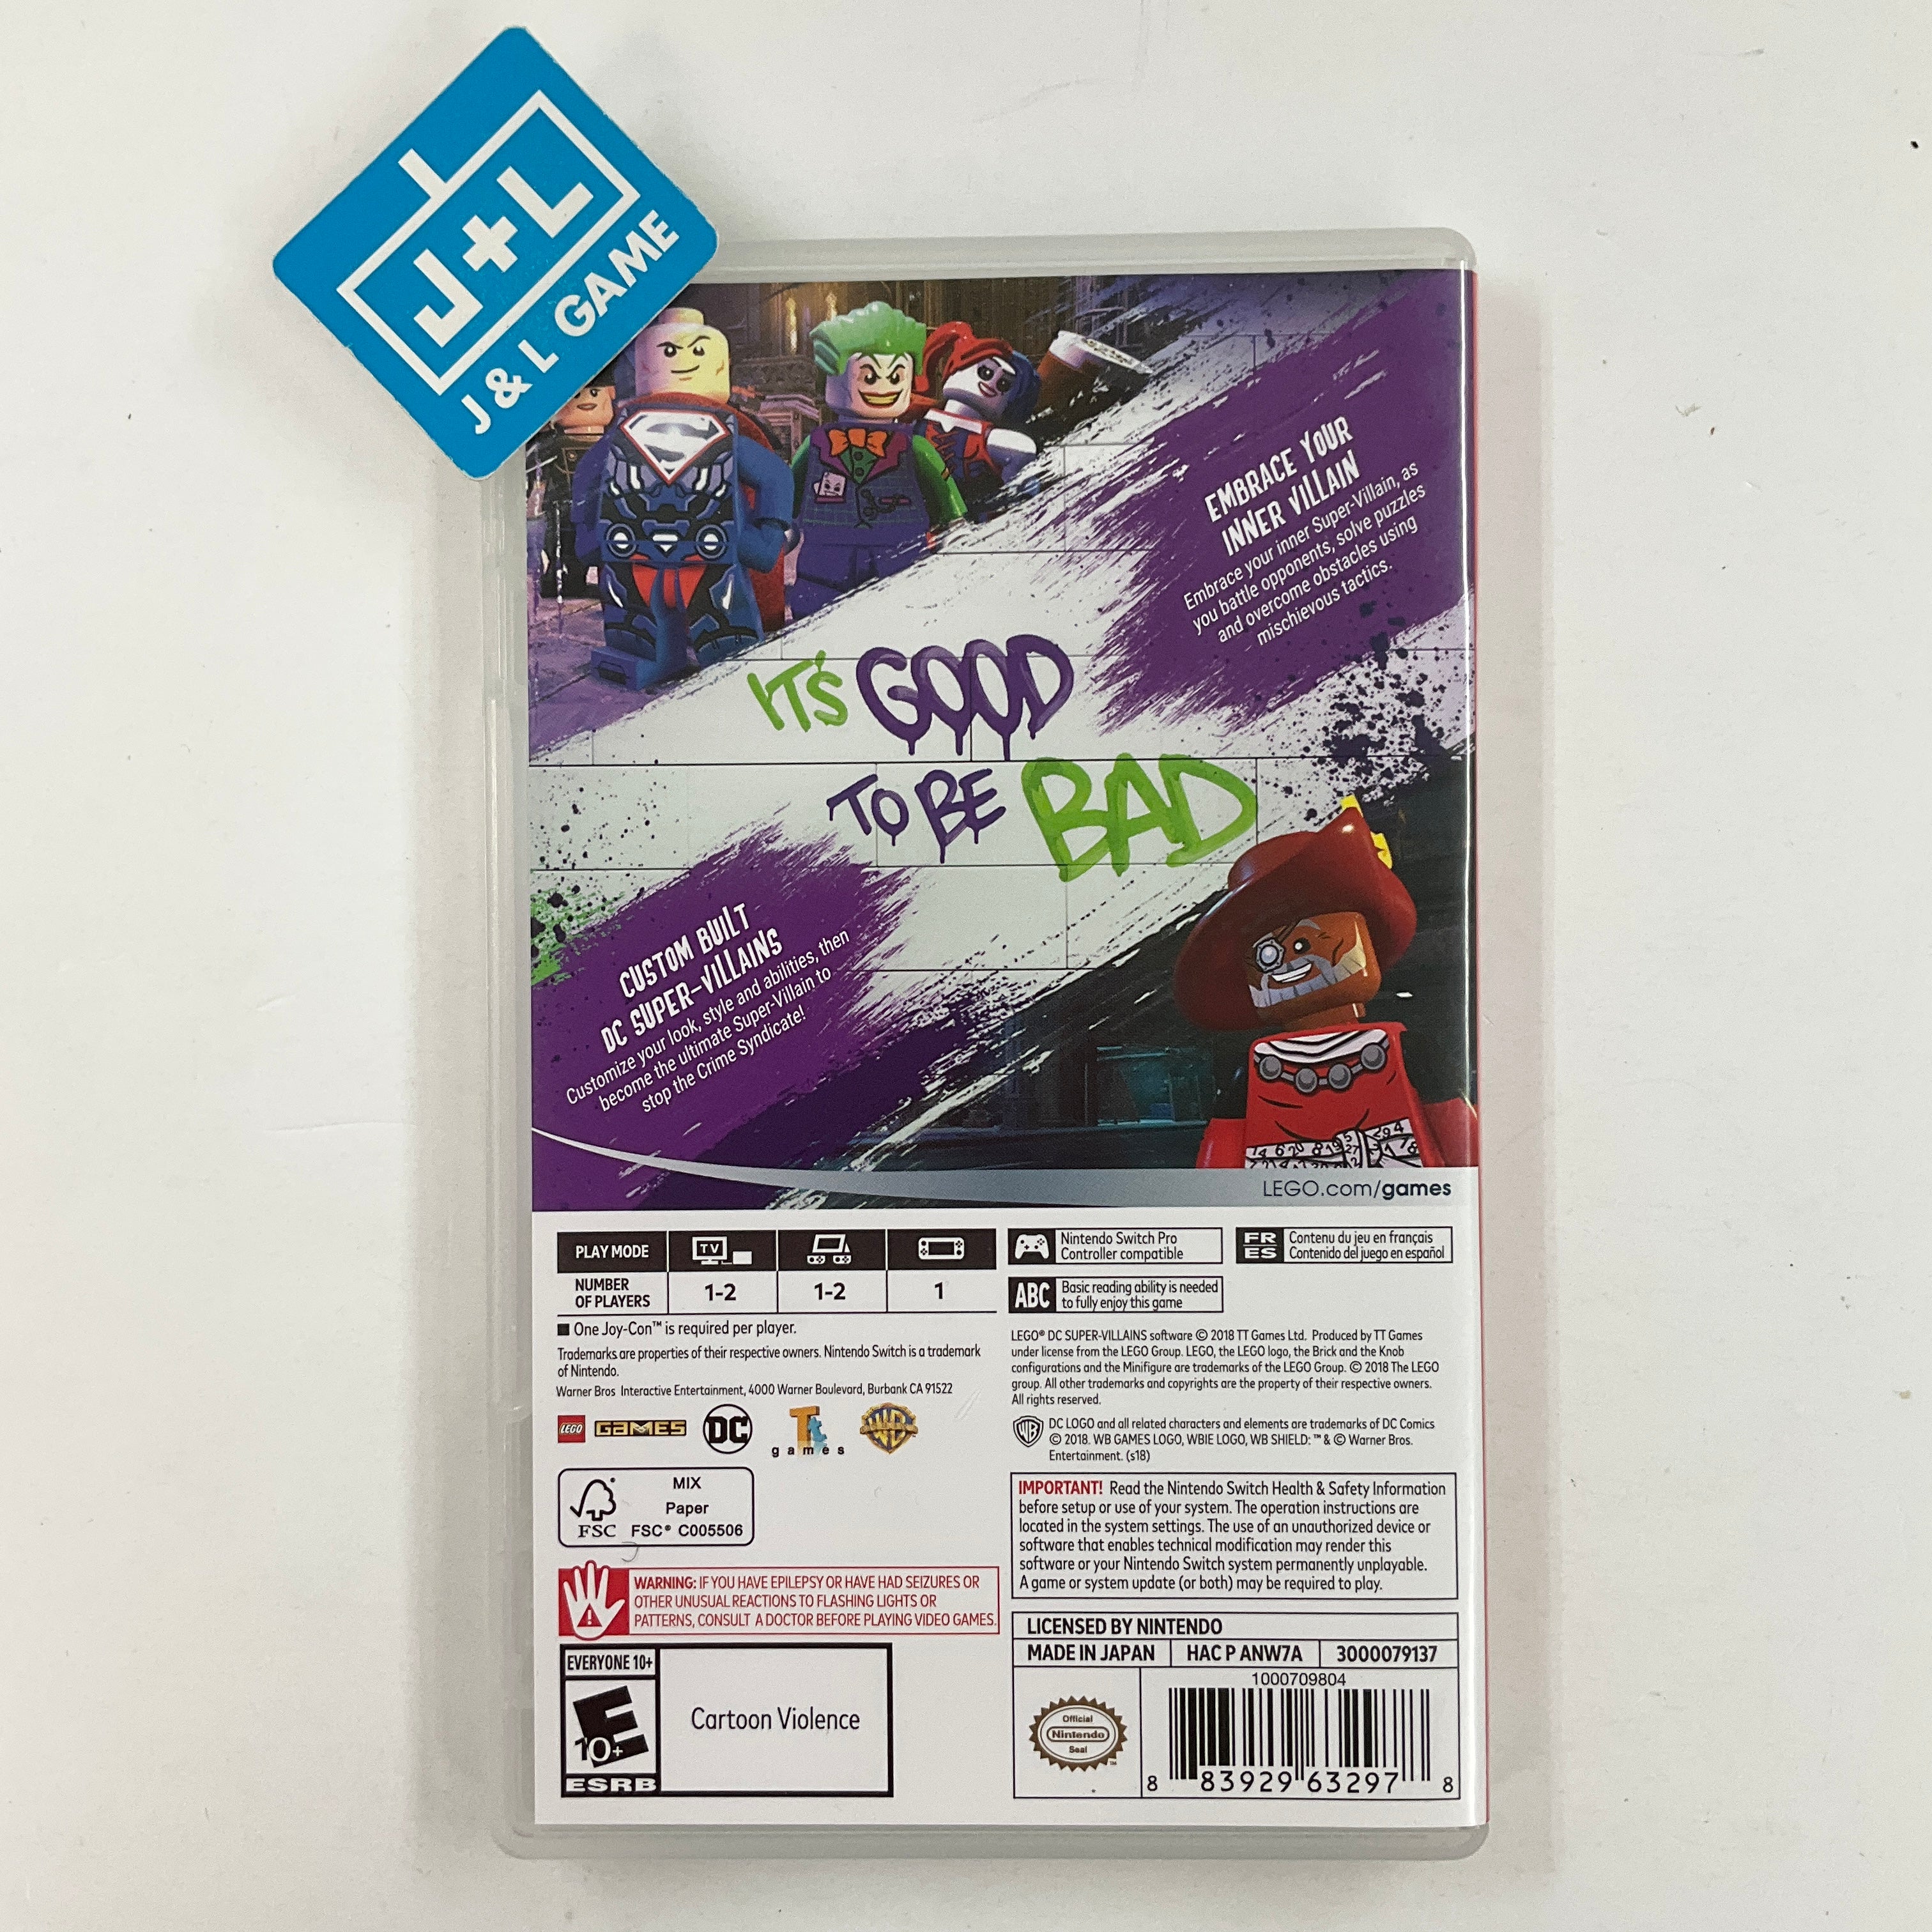 LEGO DC Super-Villains - (NSW) Nintendo Switch [Pre-Owned] Video Games Warner Bros. Interactive Entertainment   